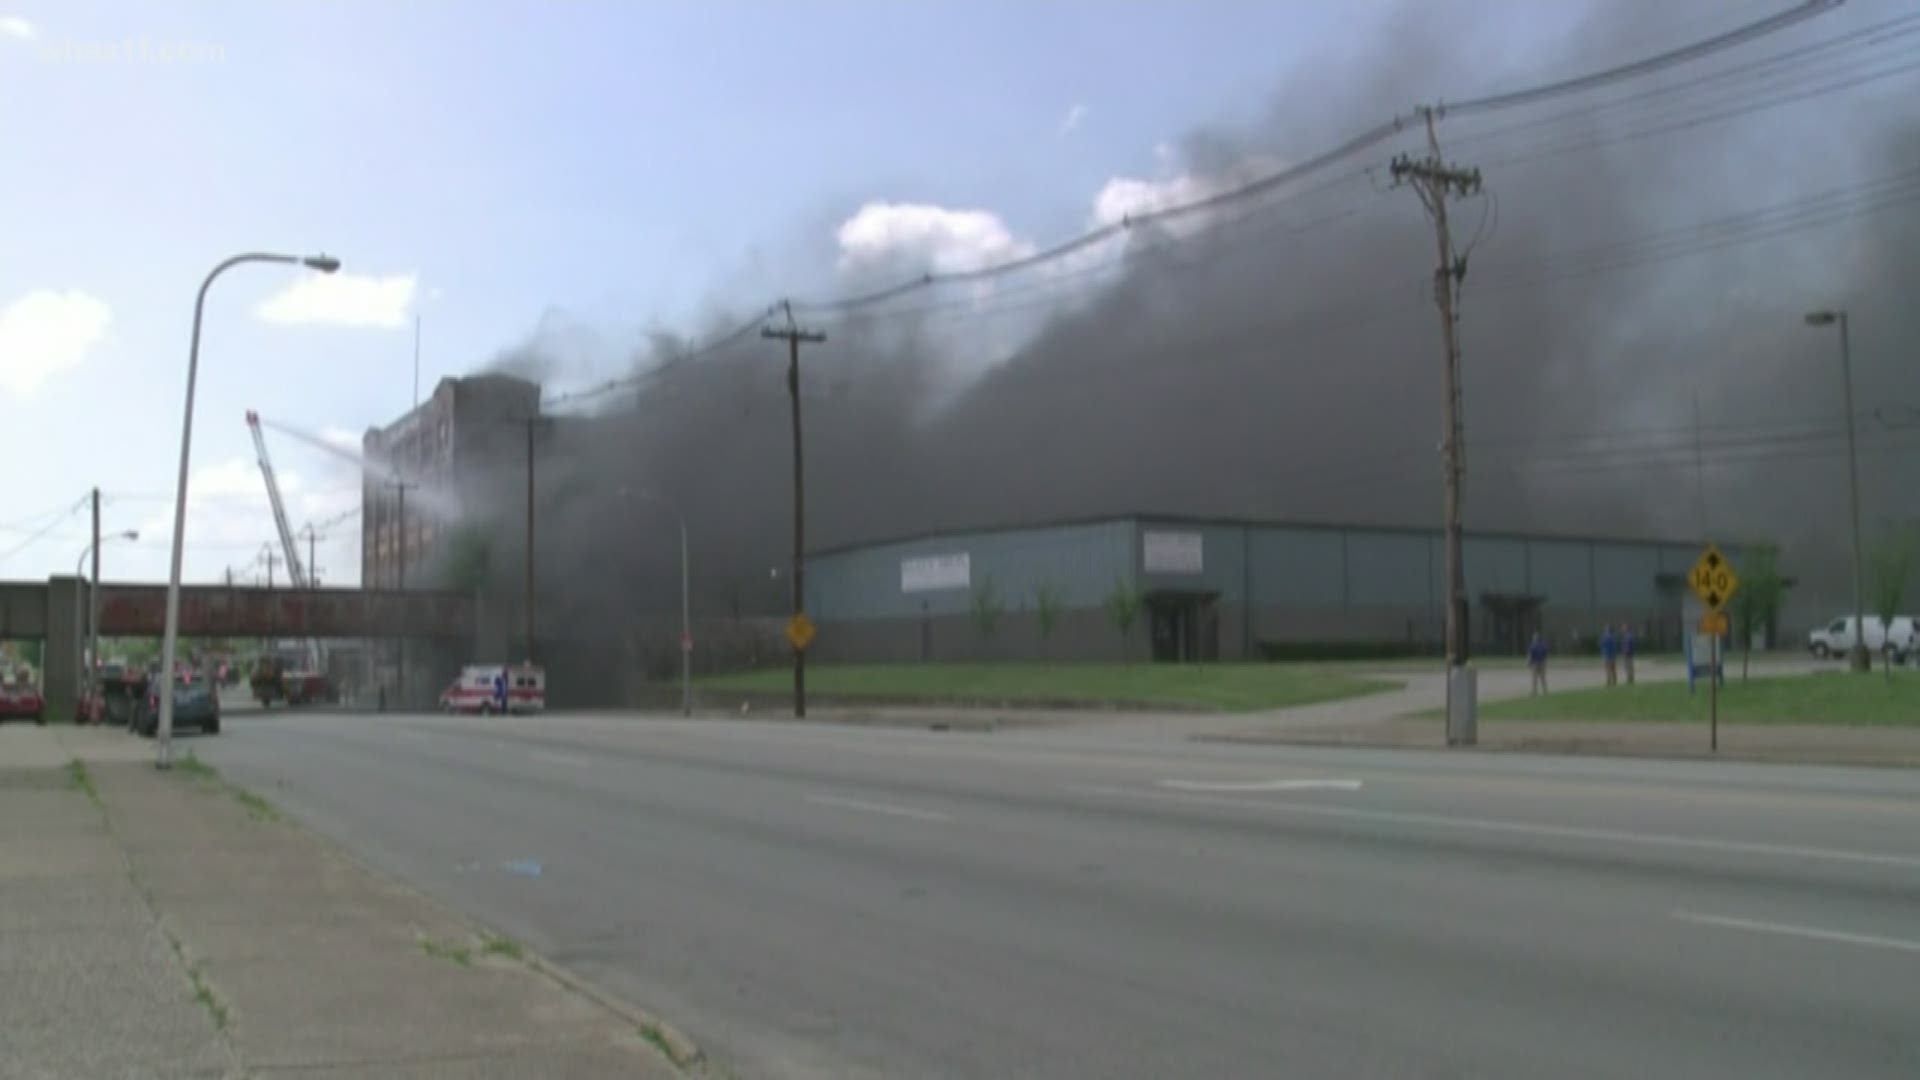 Officials are looking to determine the cause of a fire that happened at a five-story vacant warehouse in West Louisville.